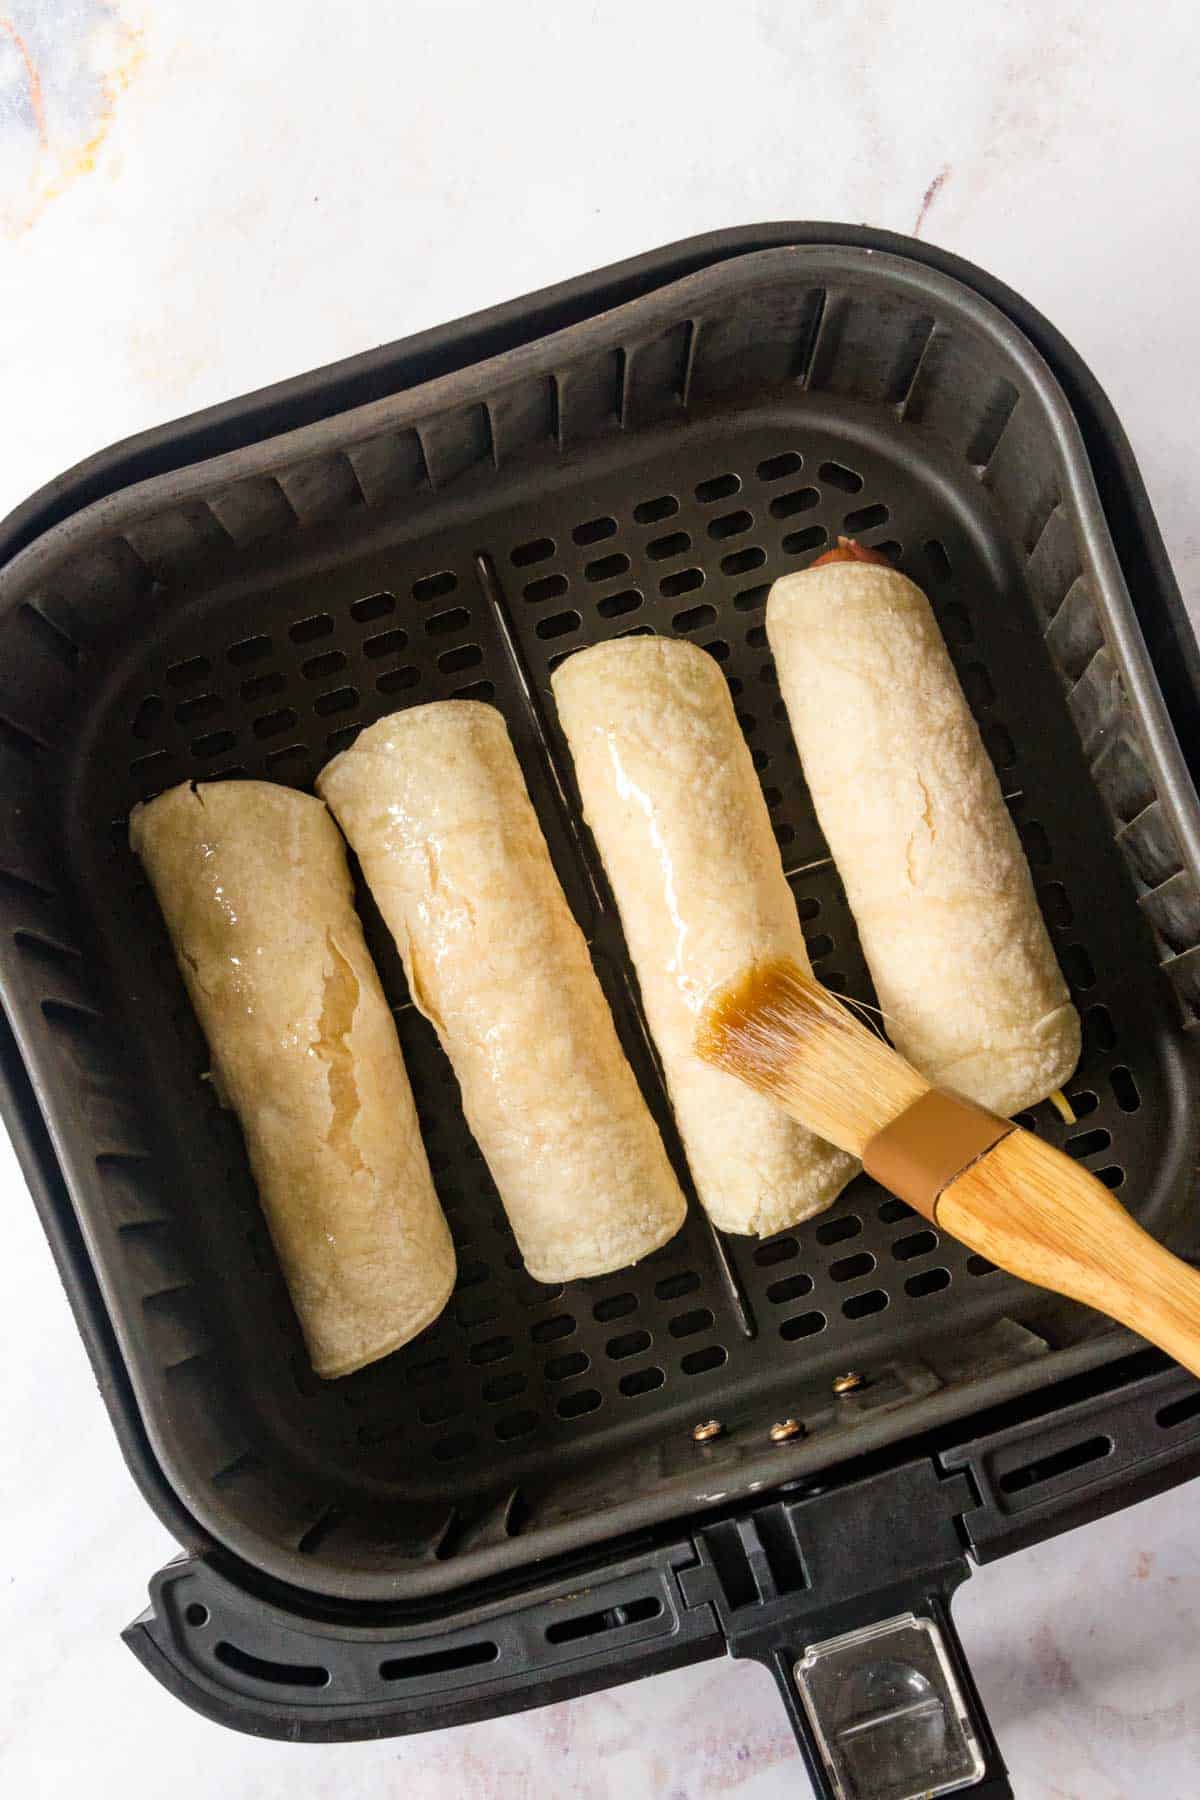 brushing oil on uncooked hot dogs wrapped in tortillas in an air fryer basket.